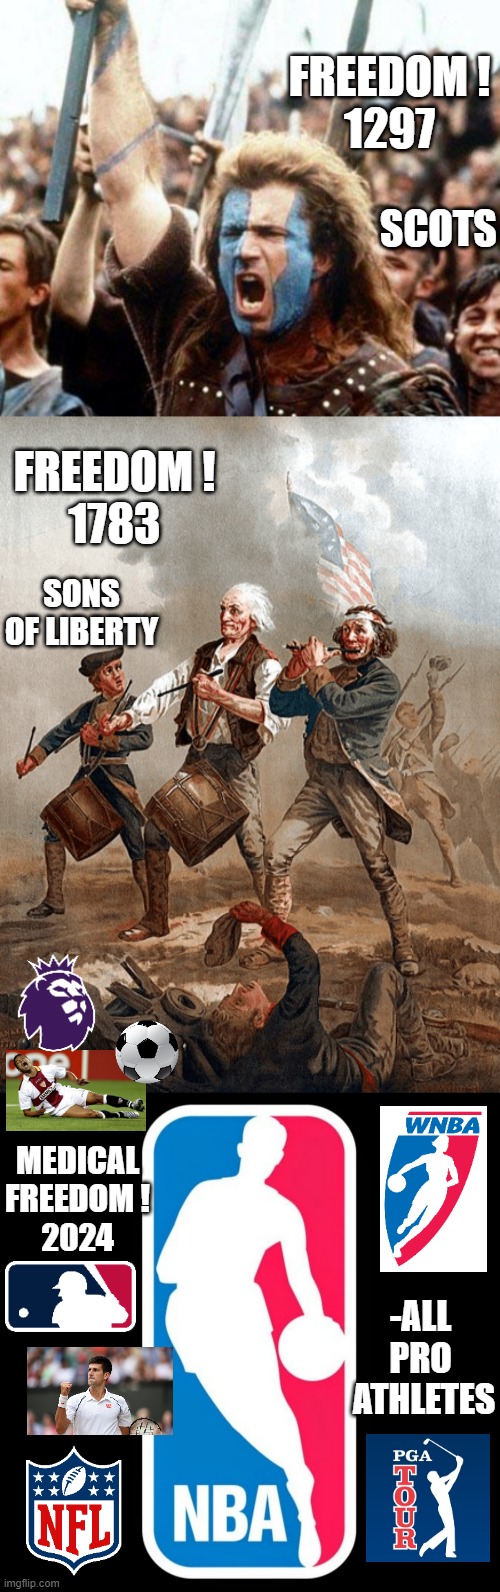 MEDICAL FREEDOM ! 2024 Says Dr. Drew & John Stockton NBA Legend | FREEDOM !
1297; SCOTS; FREEDOM !
1783; SONS OF LIBERTY; MEDICAL
FREEDOM !
2024; -ALL 
PRO 
ATHLETES | image tagged in braveheart freedom,revolution,cultural marxism,vaccines,sports,cdc | made w/ Imgflip meme maker